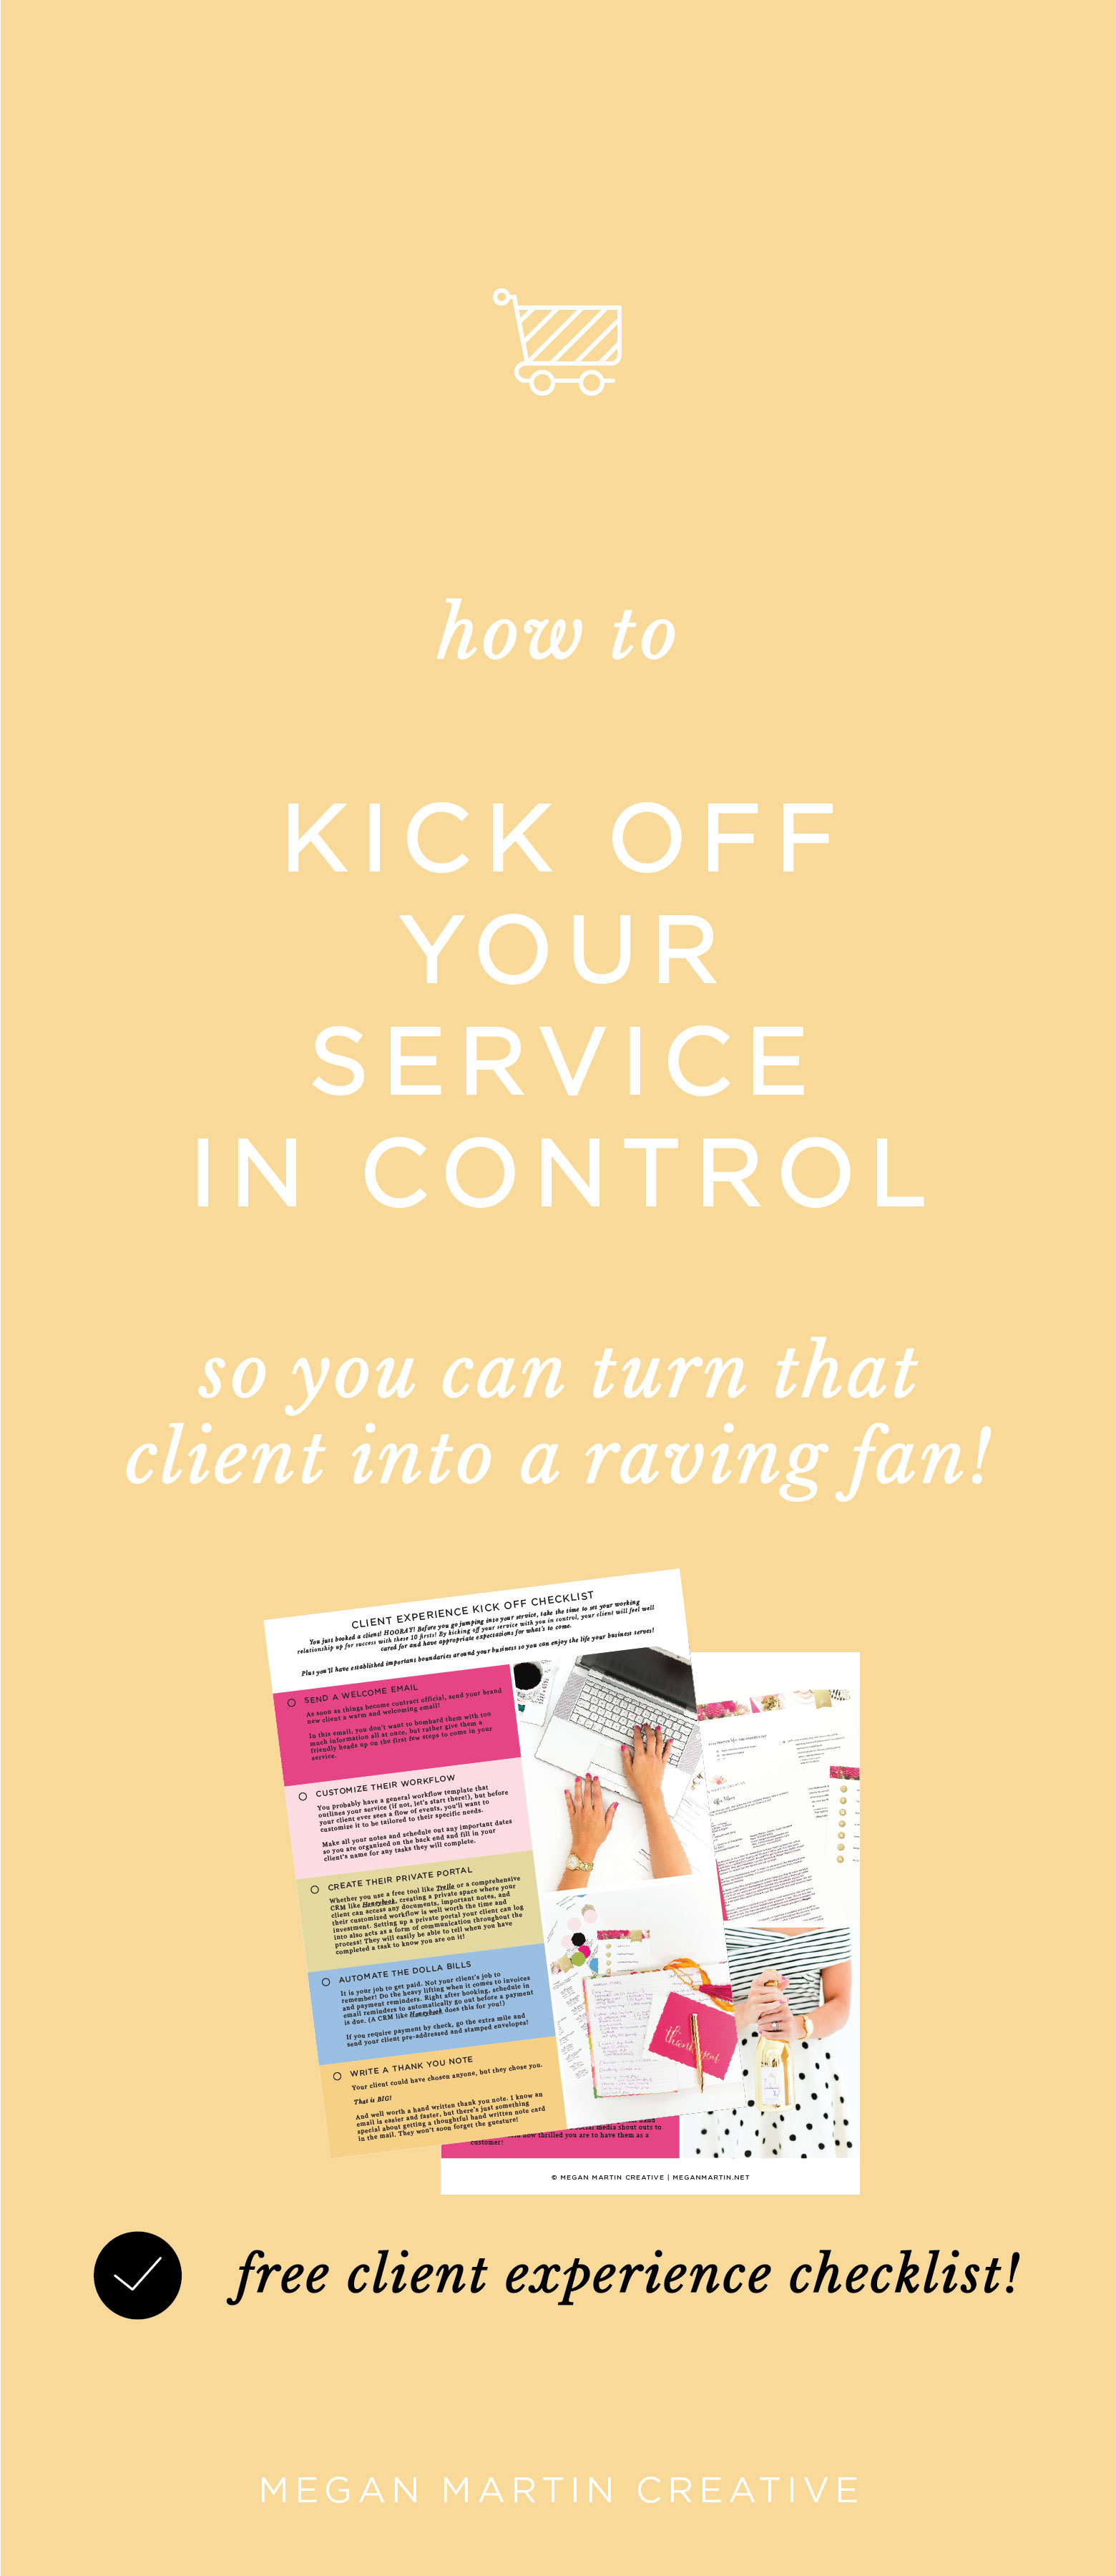 How to kick off your service in control so you can turn your clients into raving fans on Megan Martin Creative, client experience, how to book more clients, how to get more business, creative service business, creative entrepreneur